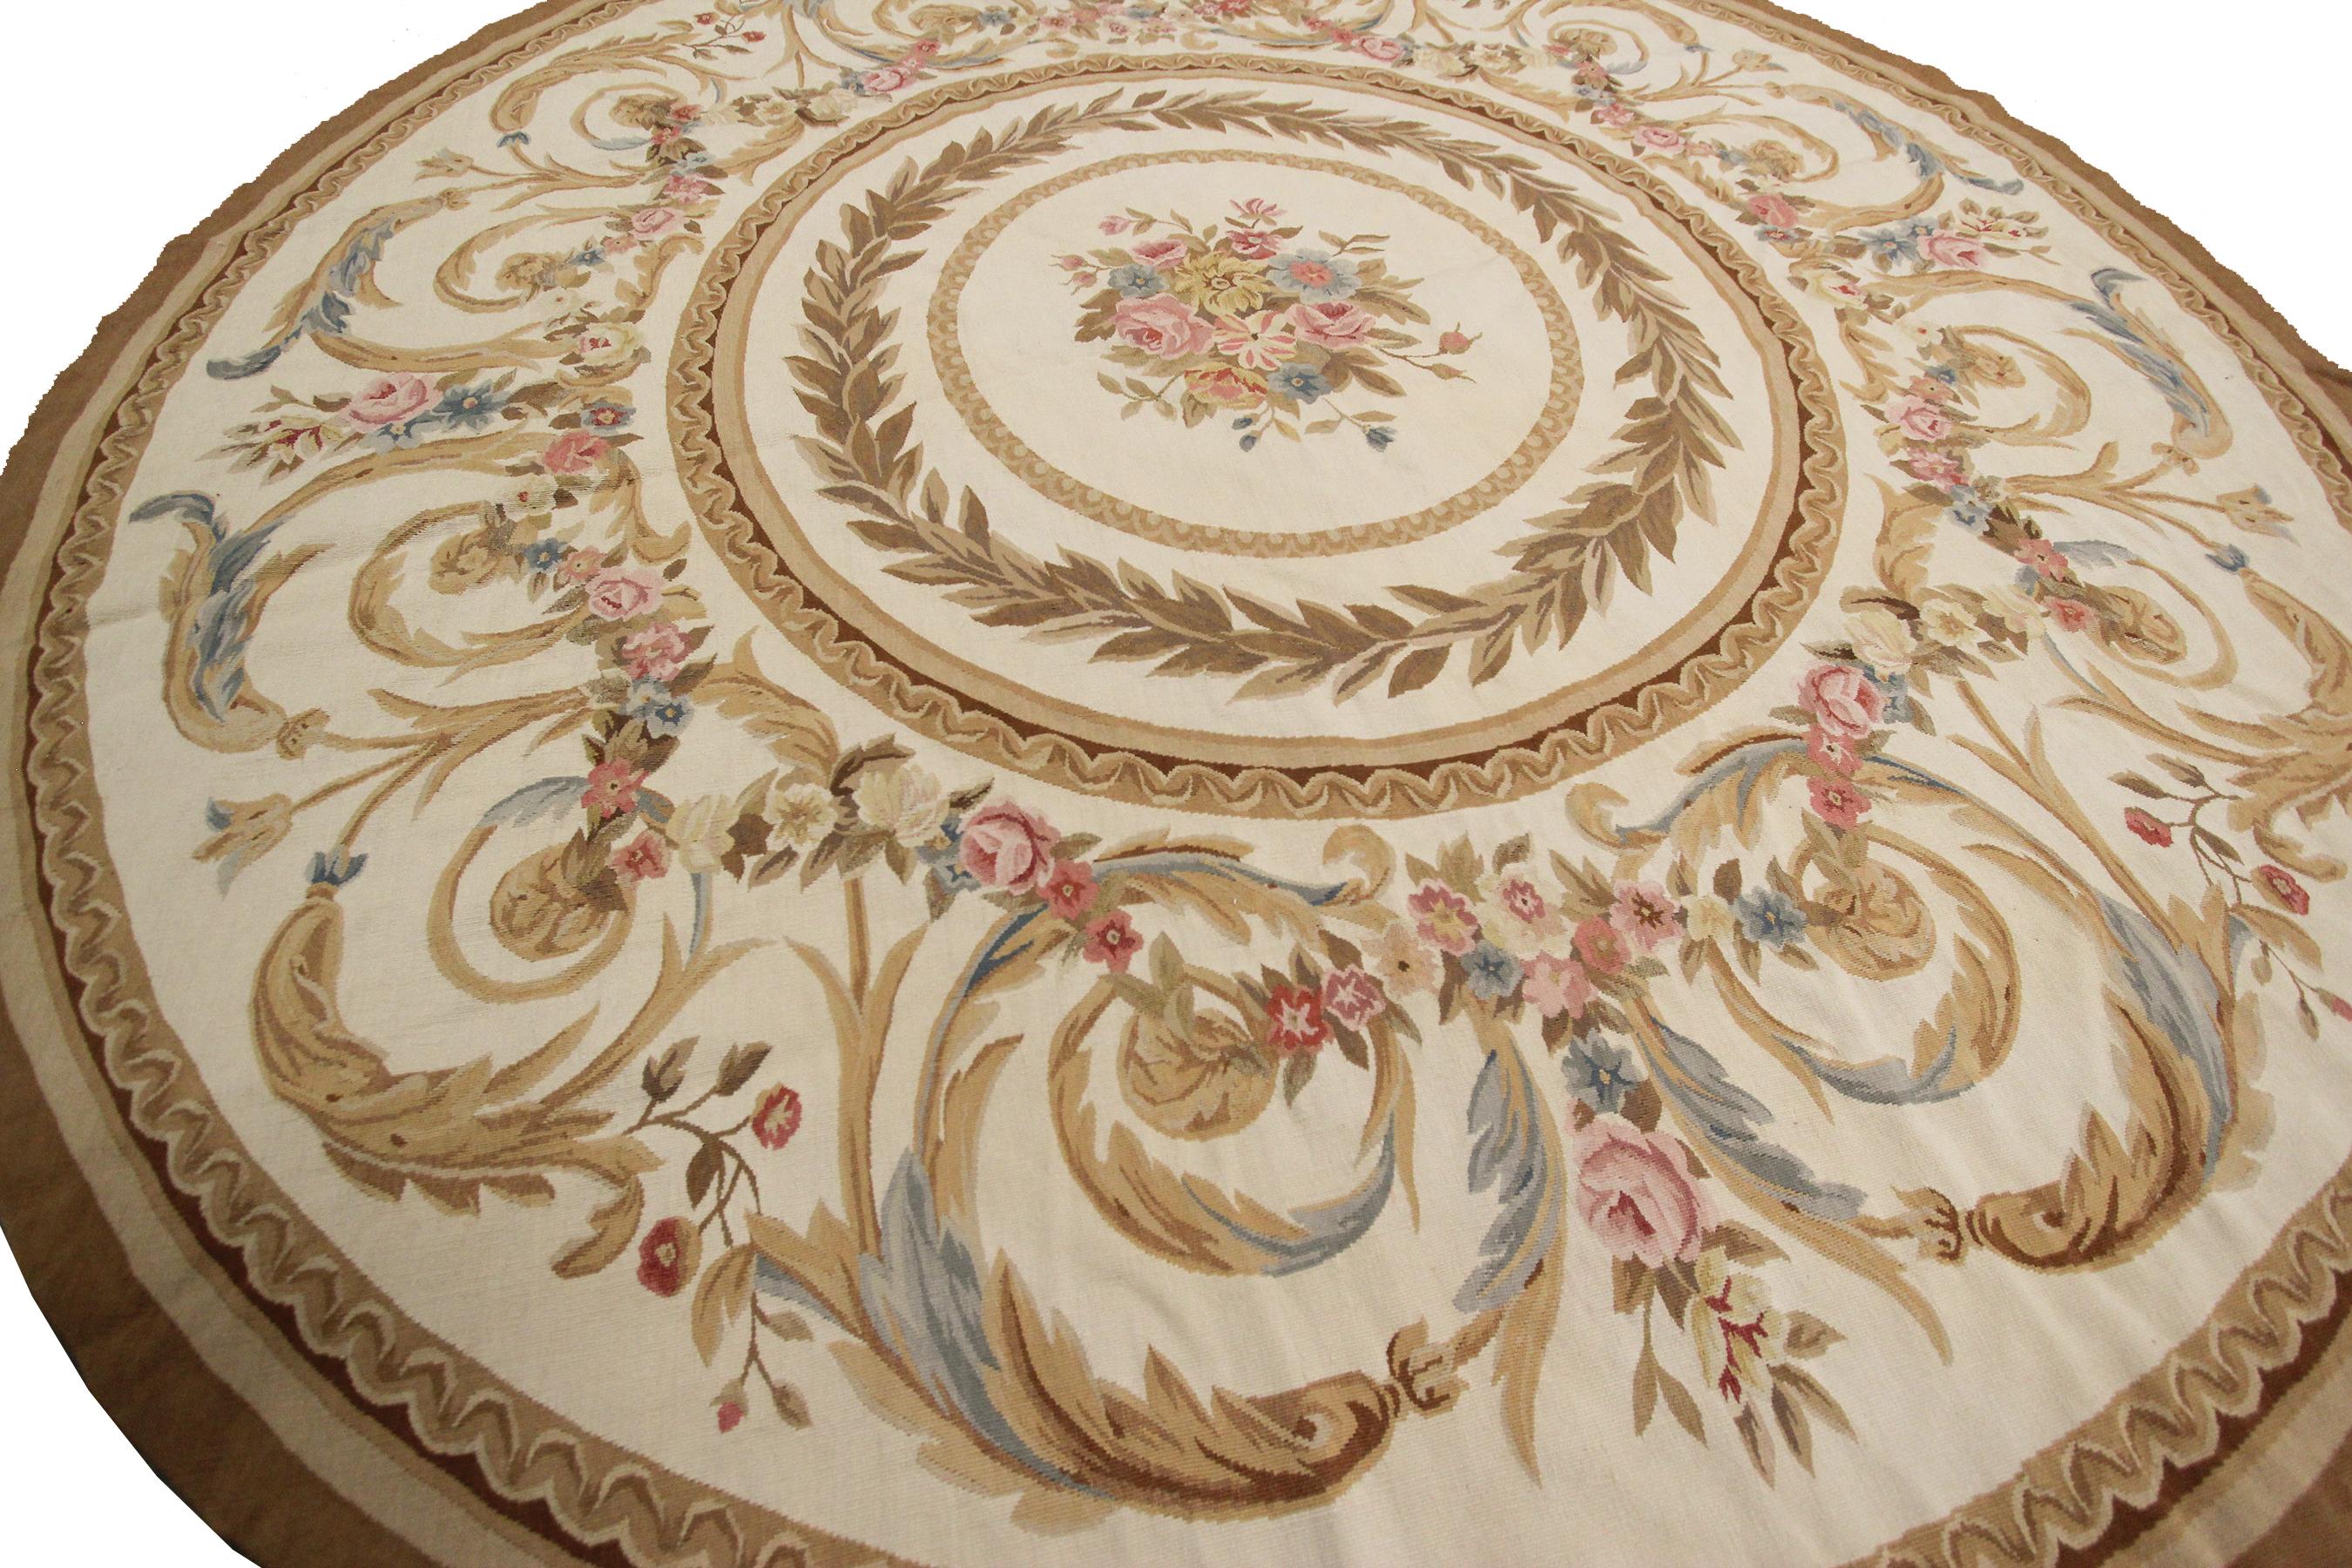 Antique French Aubusson Rug Hand Woven Aubusson Rug 8x8 Round Rug 244cm x 244cm


